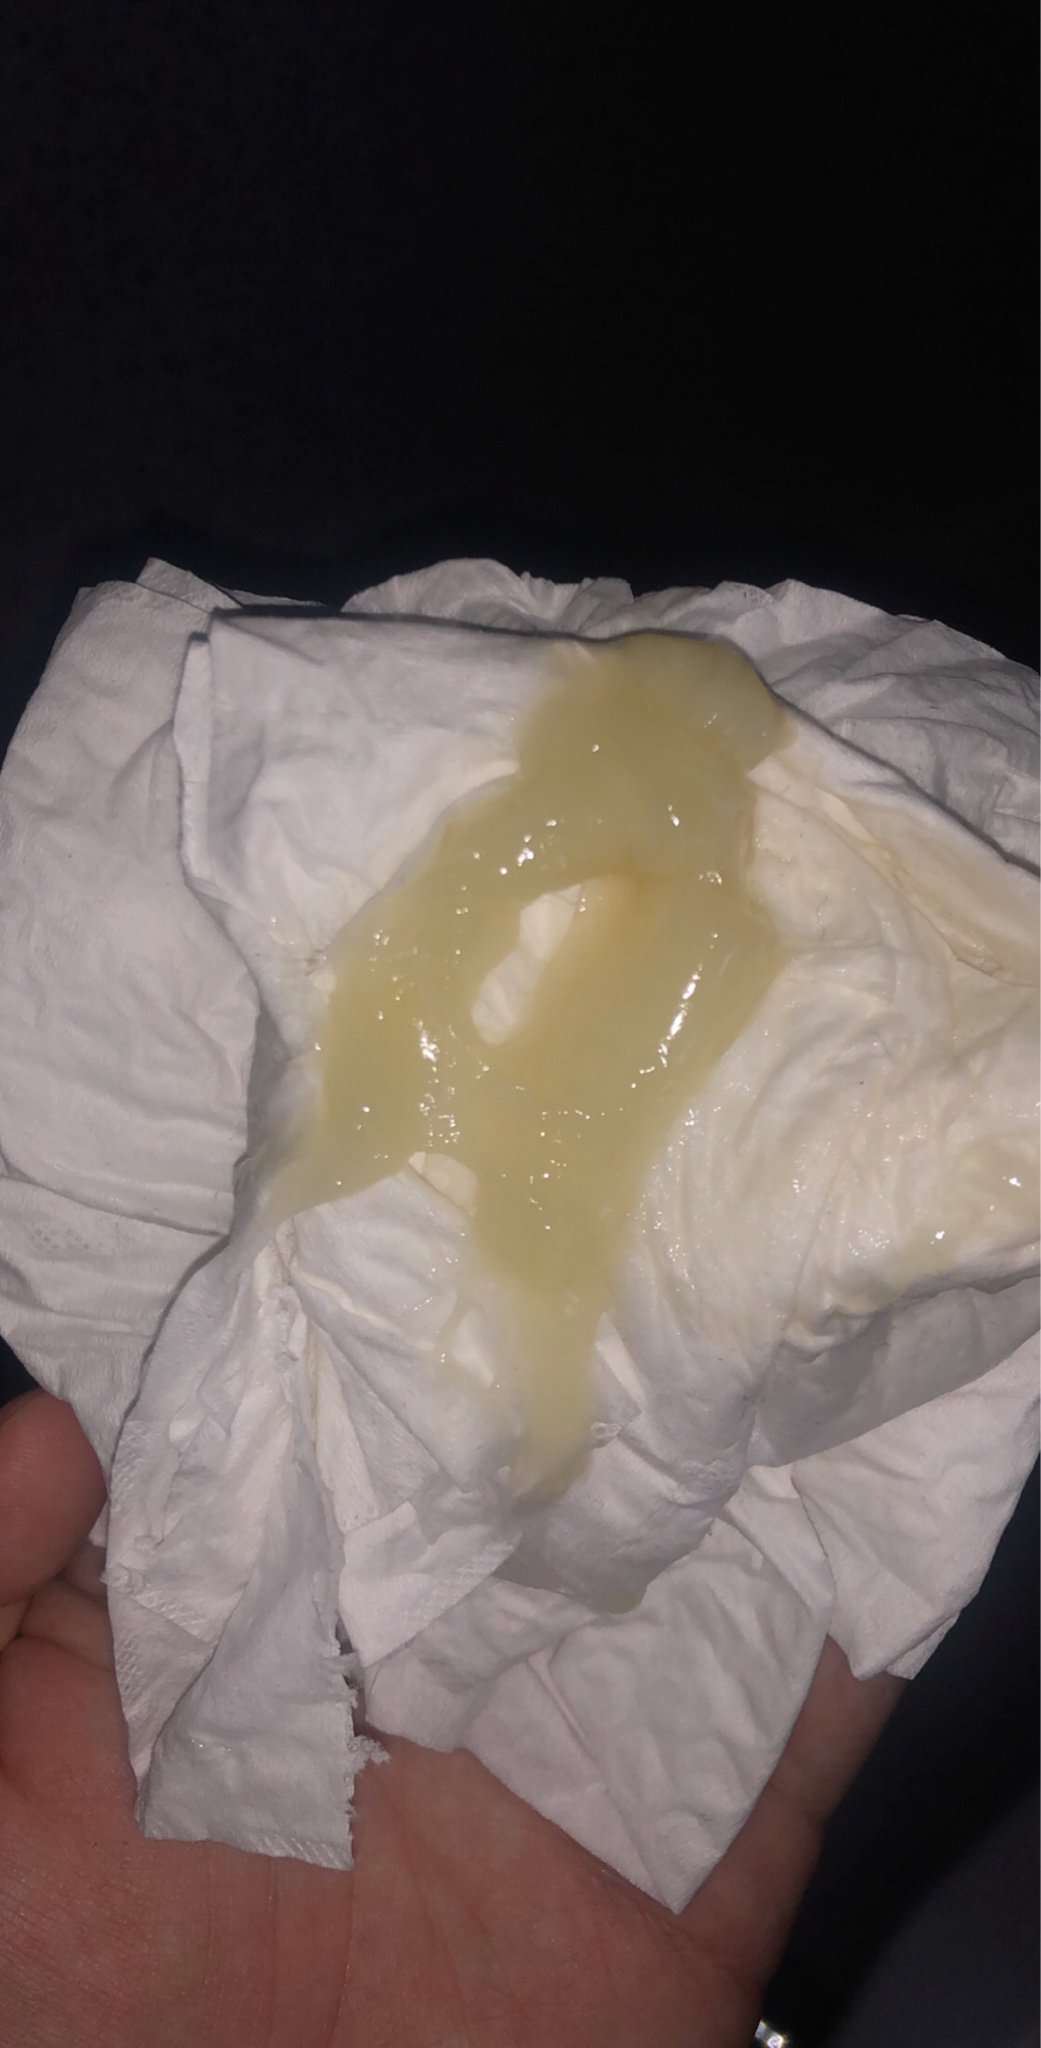 Is this my mucus plug?